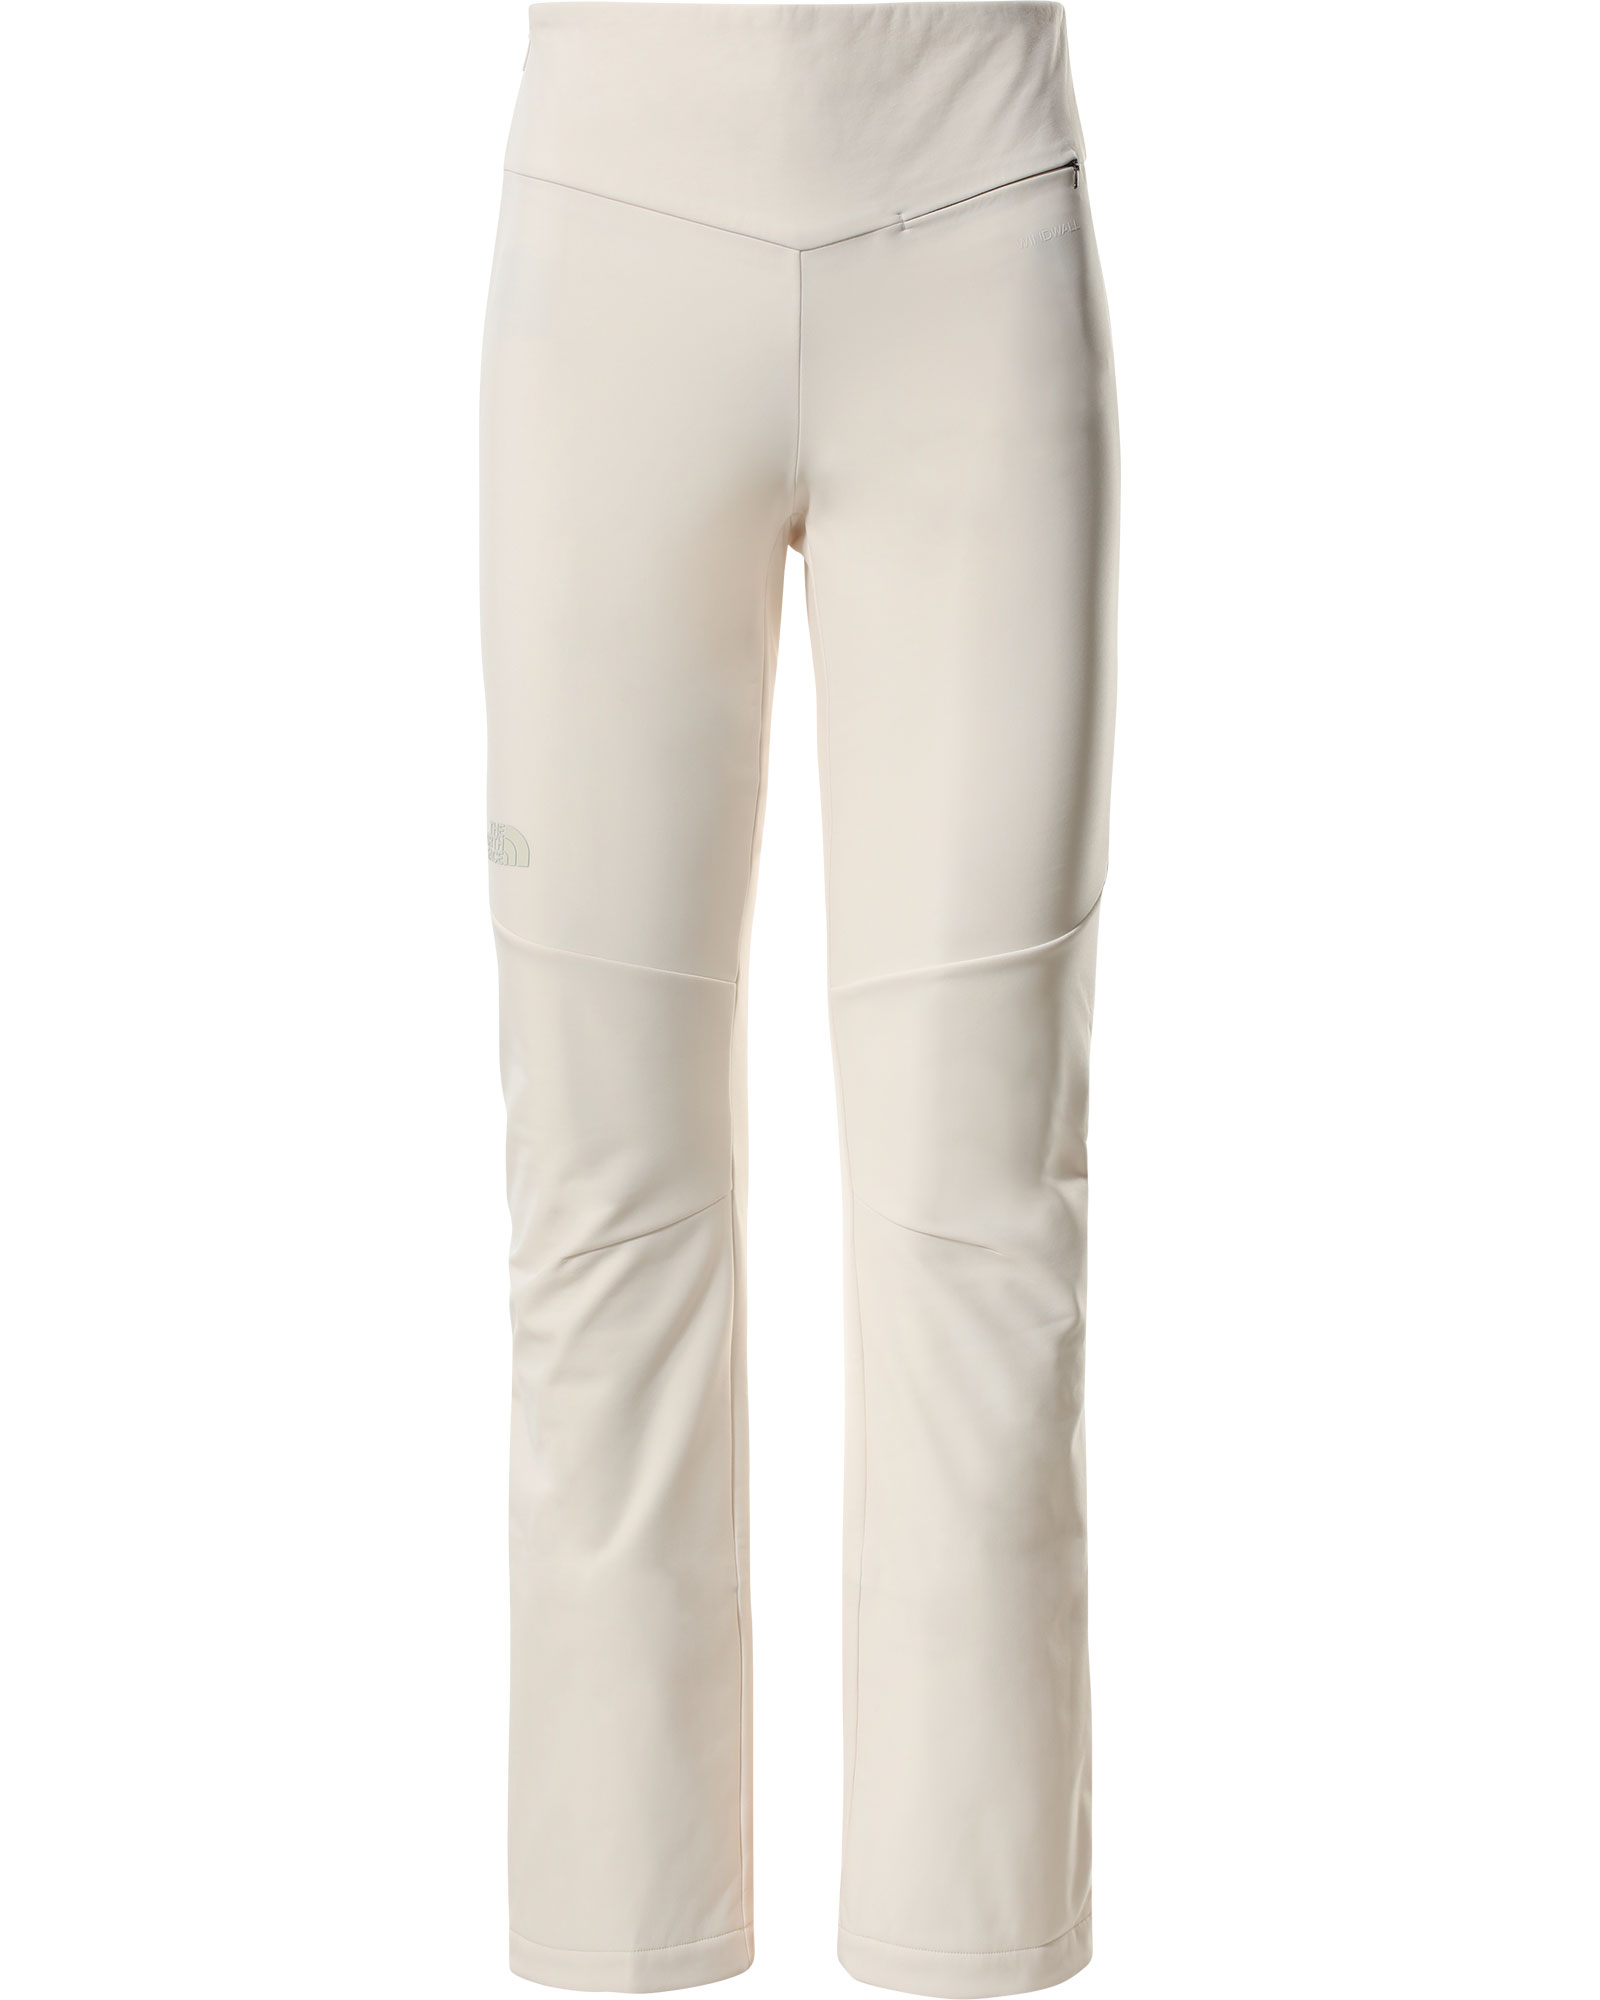 The North Face Snoga Stretch Women’s Pants - Gardenia Whitre 14S